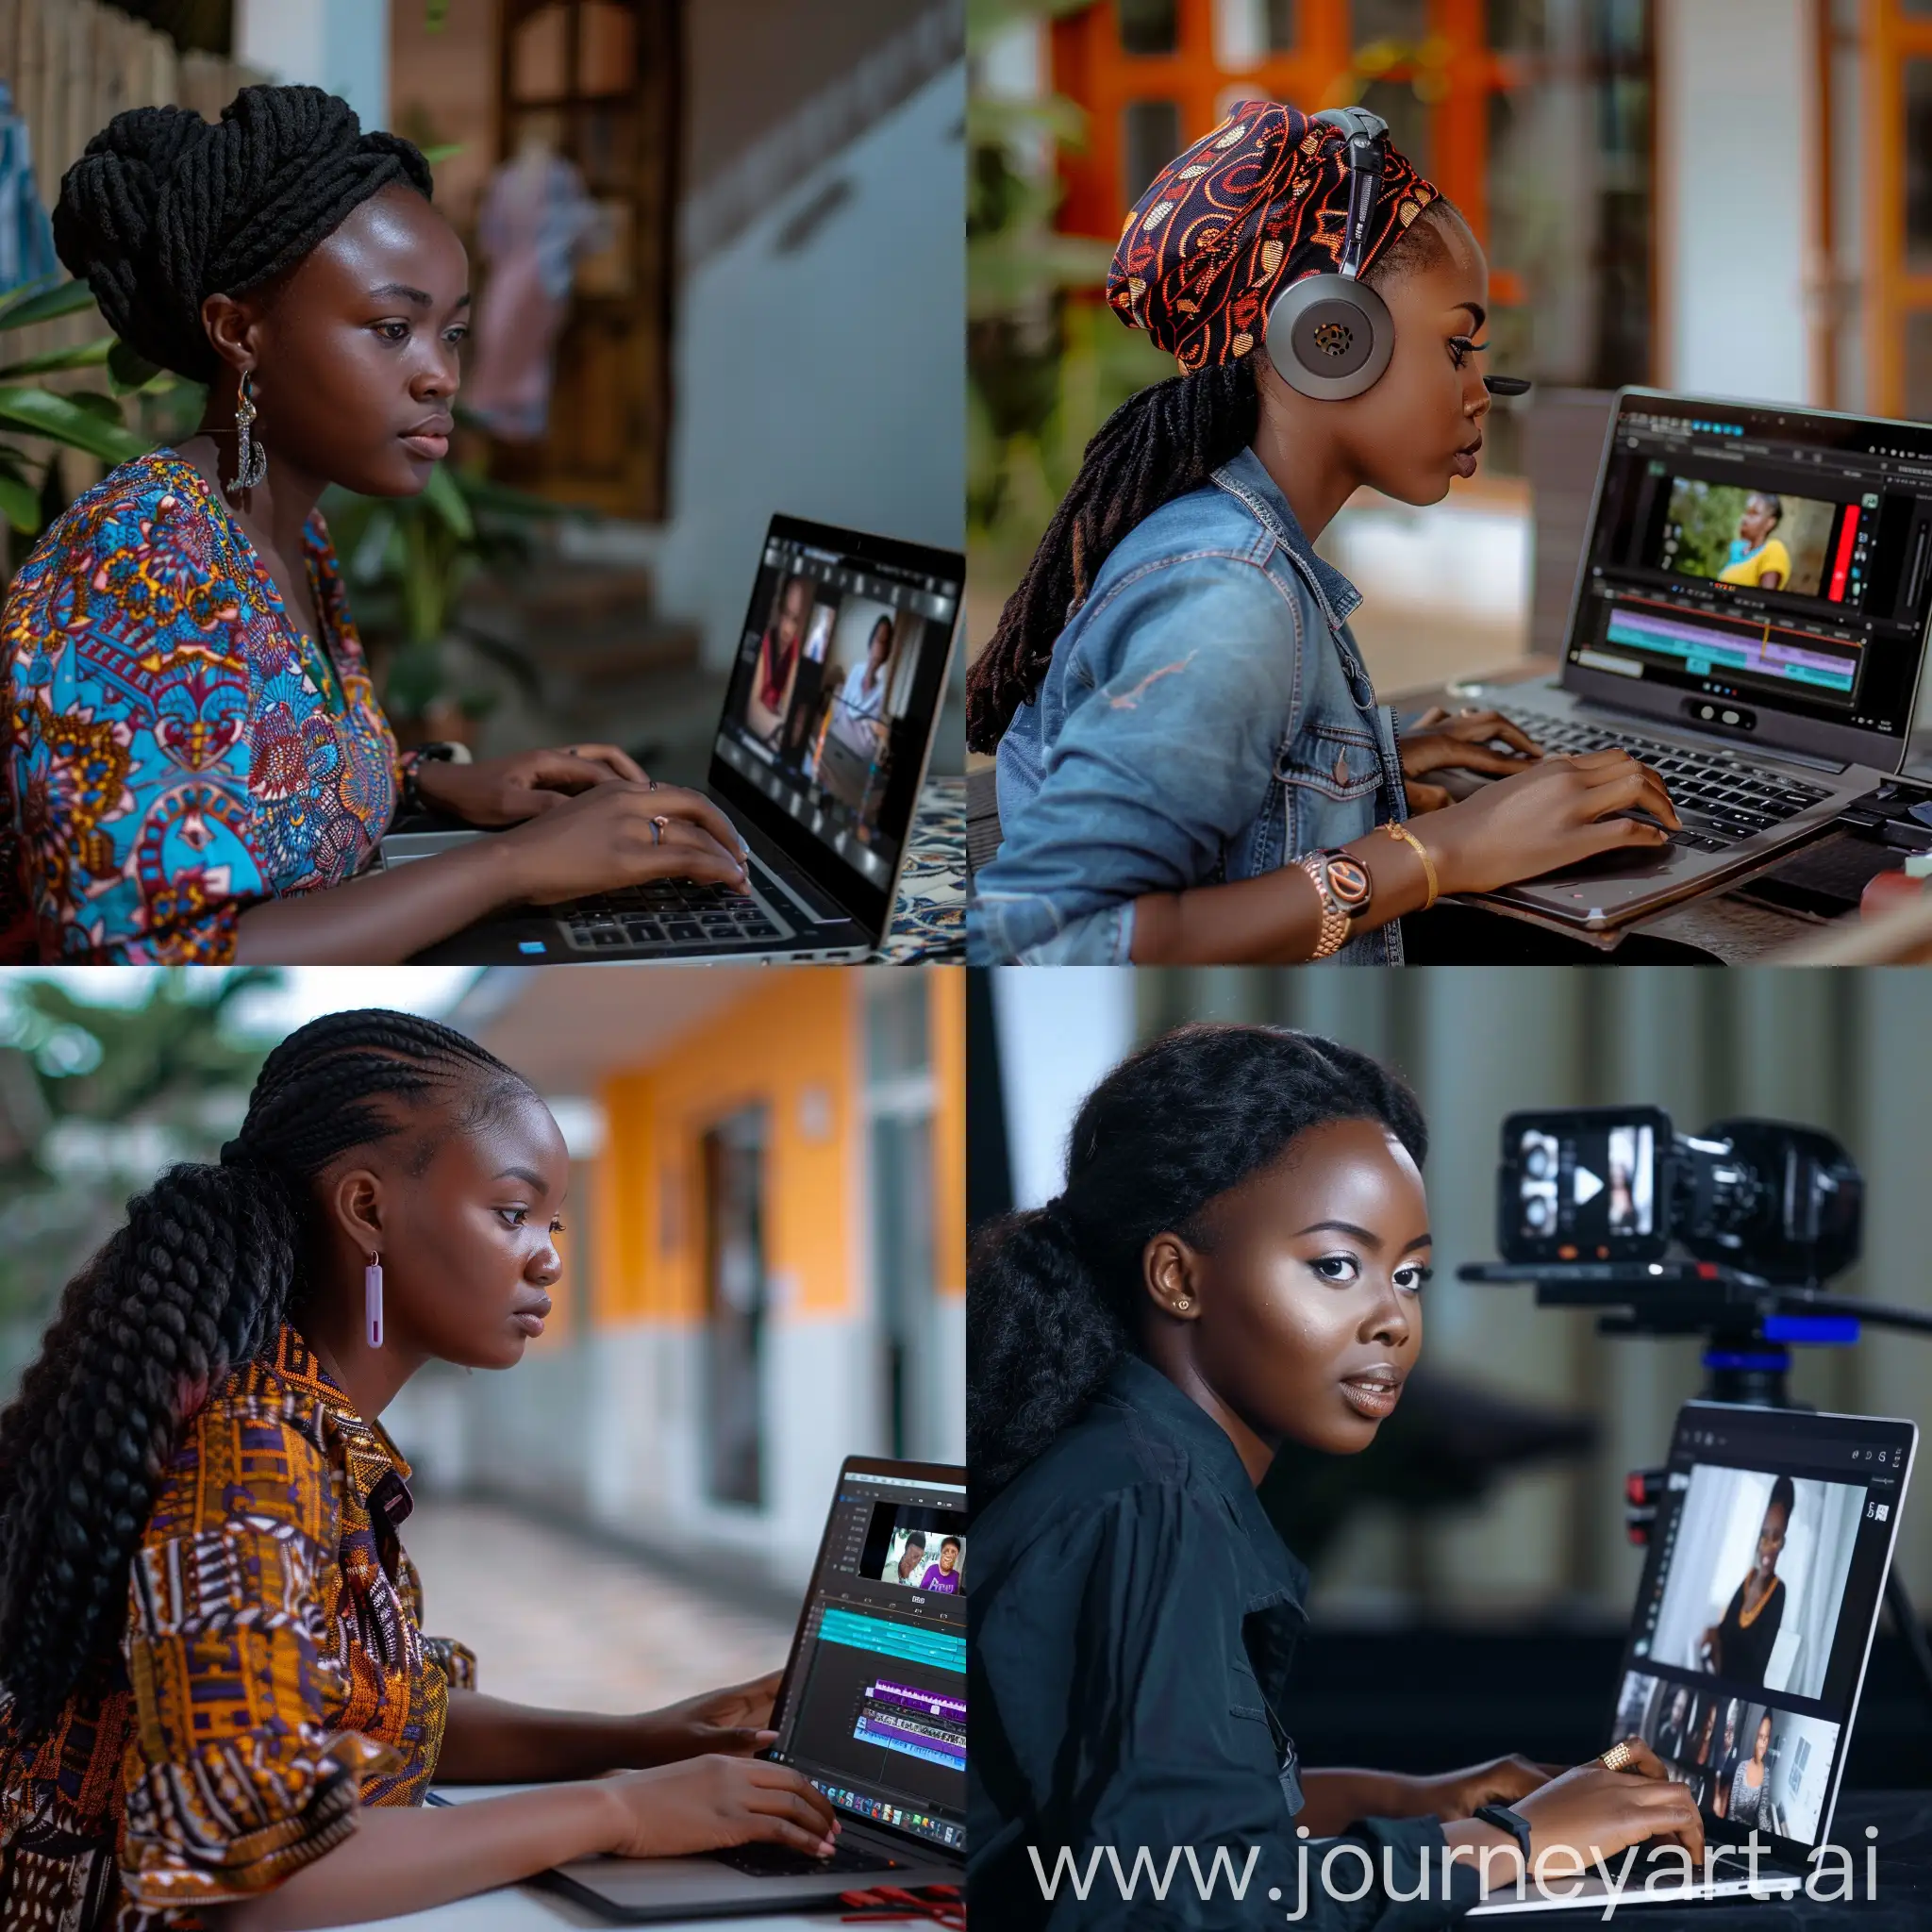 An image of a young African - Nigerian lady in her early 30s editing a video on her laptop